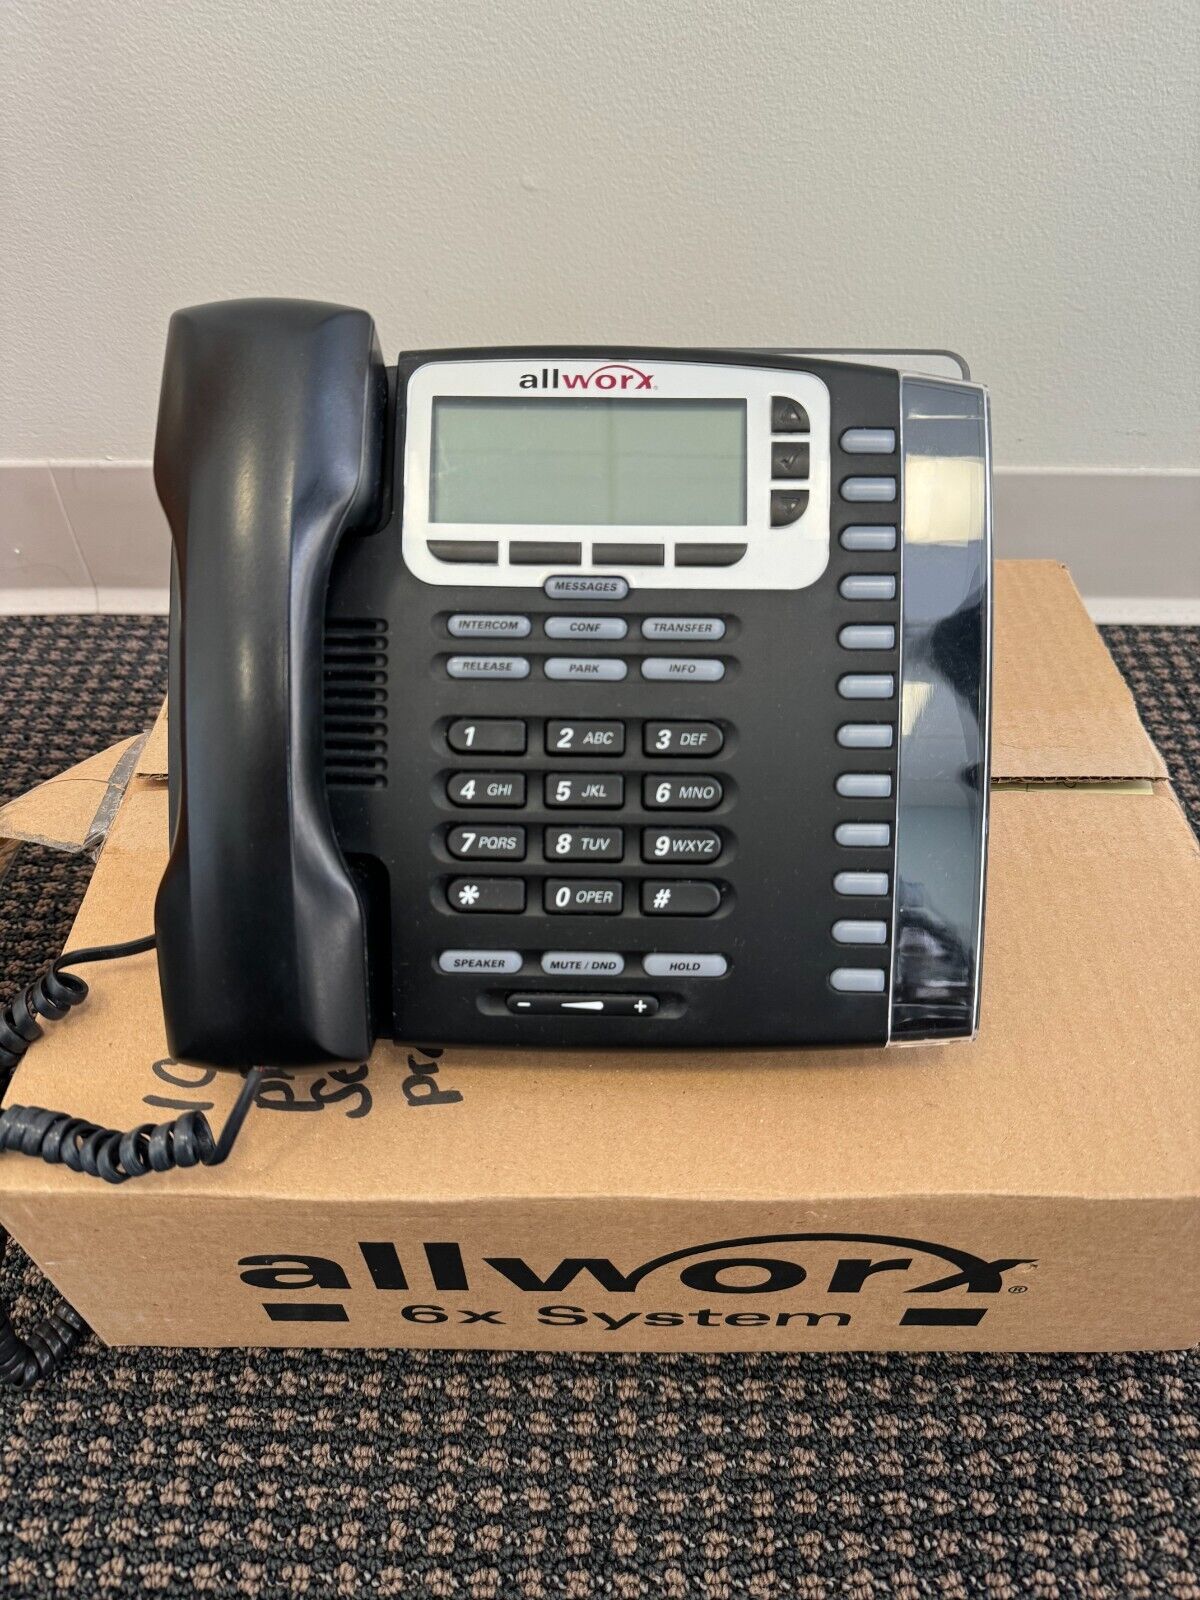 Allworx Lot 12x 9212L Backlit Voip Display IP Phone and Allworx 6x Server